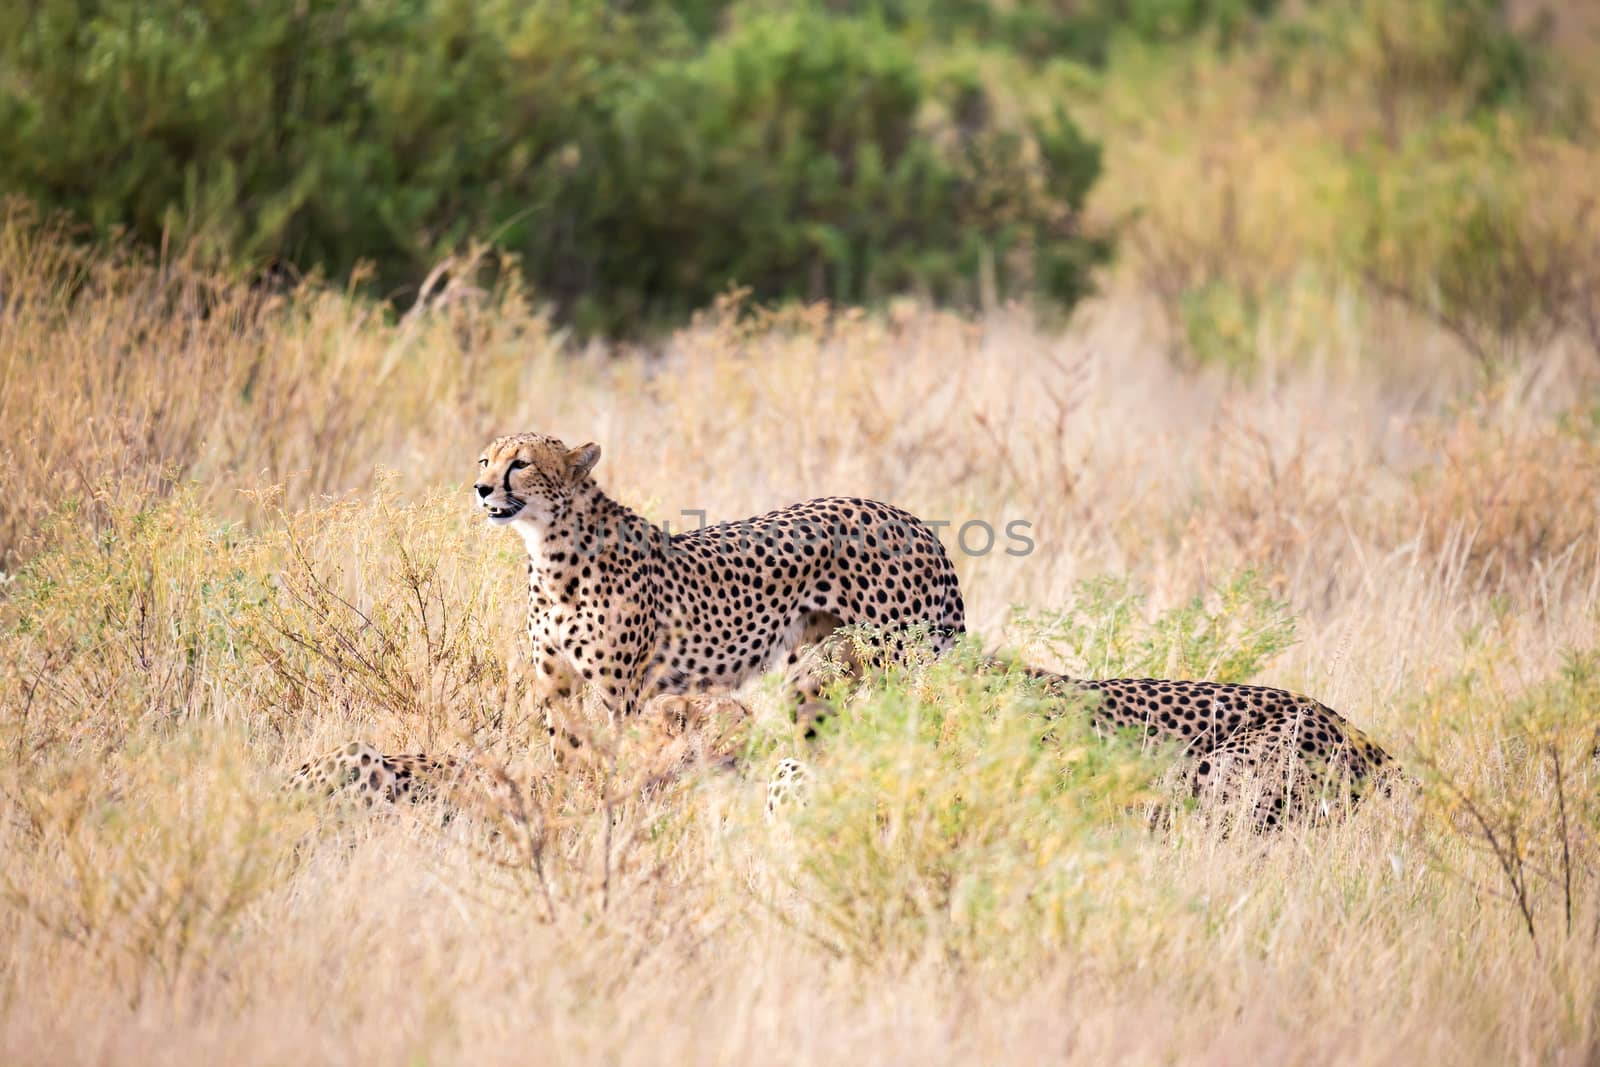 Two cheetahs in the grass look into the distance by 25ehaag6